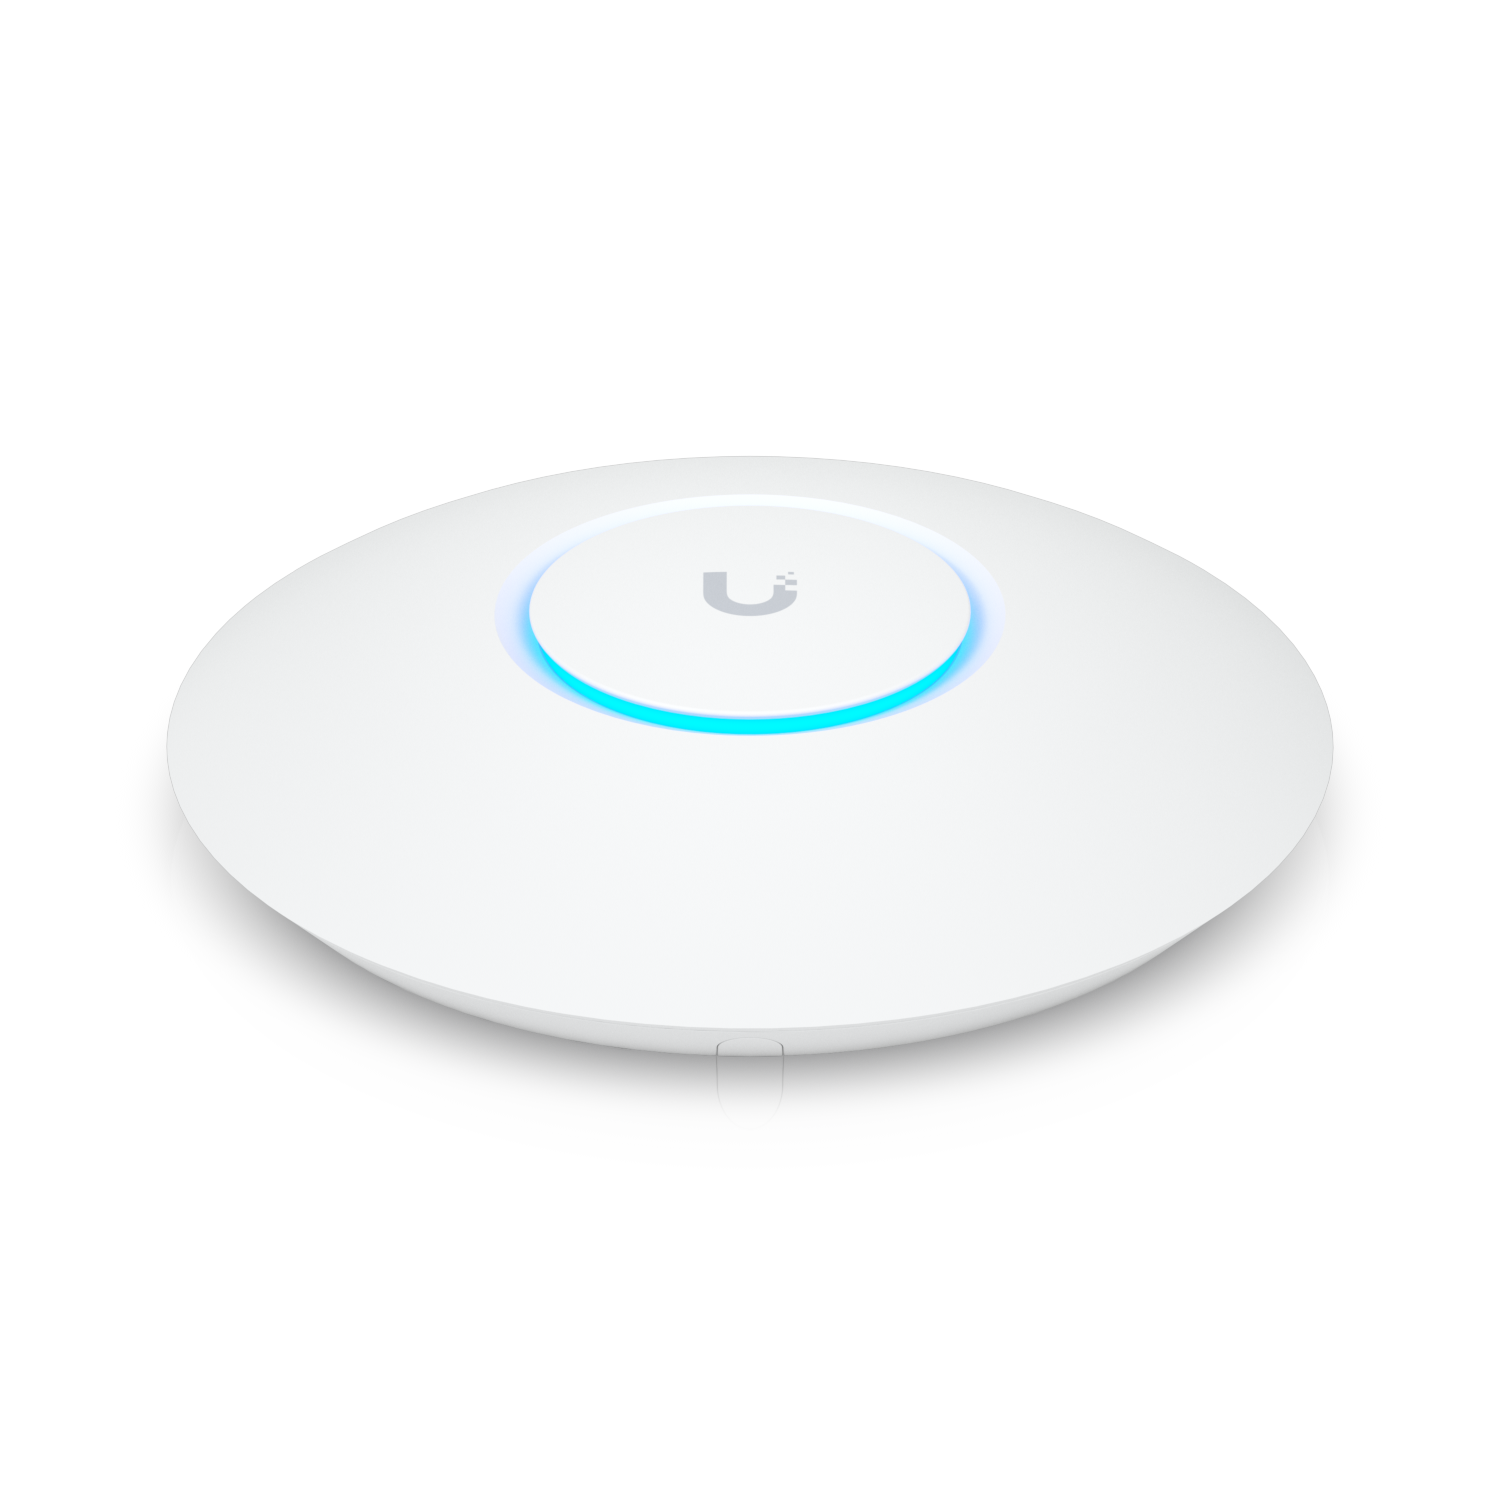 Ubiquiti UniFi U6+, Dual-band WiFi 6 PoE Access Point, AP 2x2 Mimo, 2.4GHz @ 573.5Mbps & 5GHz @ 2.4Gbps,300+ Devices *No POE Injector